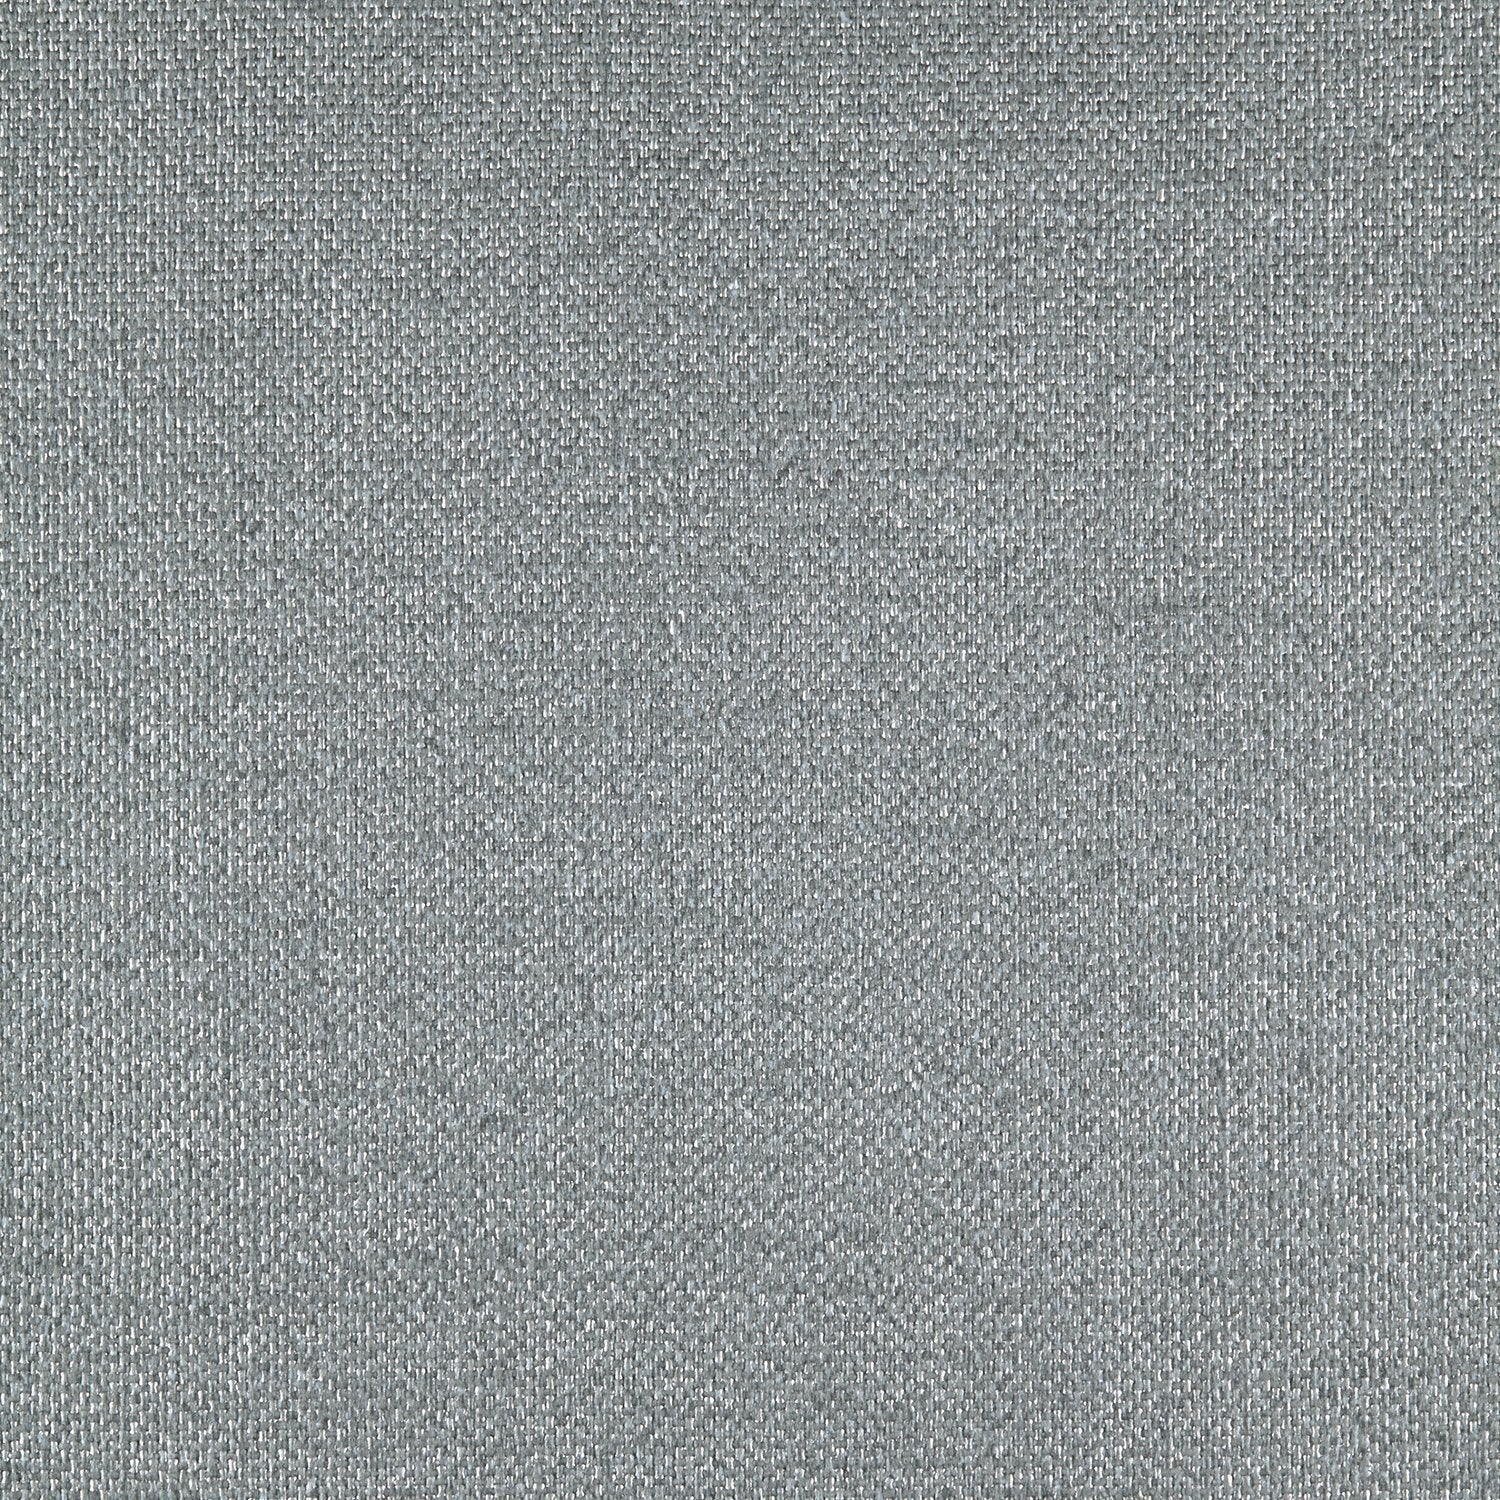 Tweed - Y46940 - Wallcovering - Vycon - Kube Contract